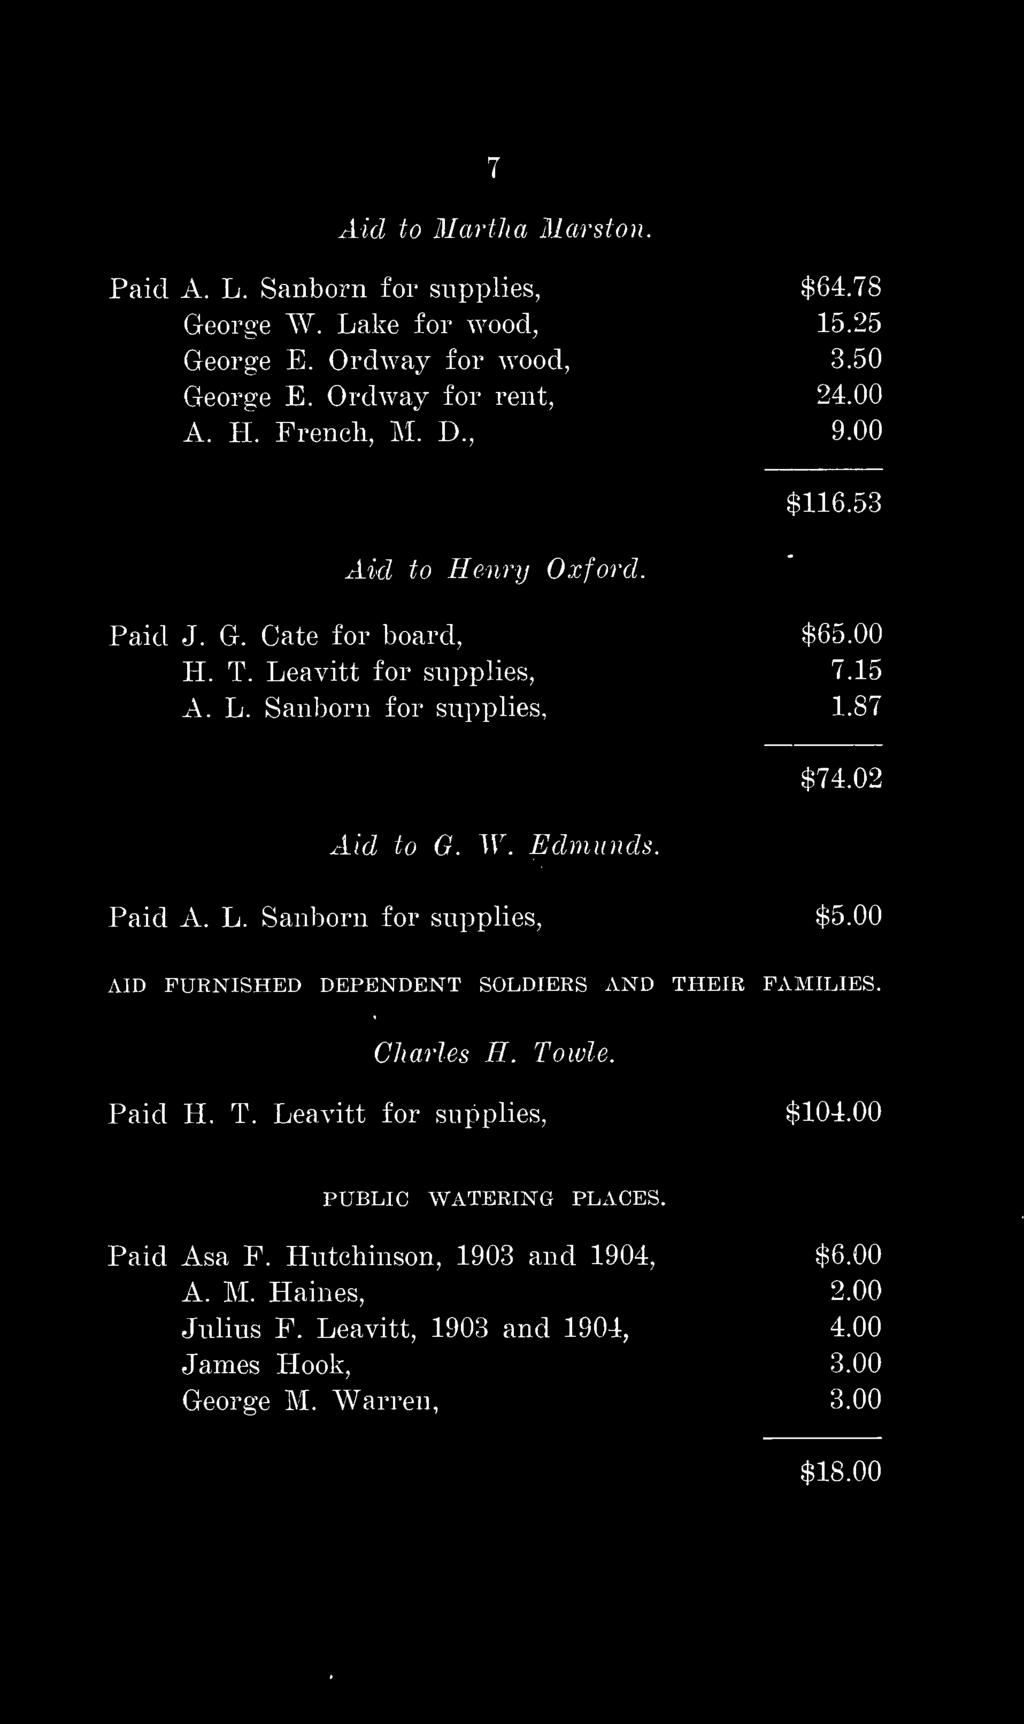 02 Aid to G. W. Edmunds. Paid A. L. Sanborn for supplies, $5.00 AID FURNISHED DEPENDENT SOLDIERS AND THEIR FAMILIES. Charles H. Toivle. Paid H. T. Leavitt for supplies, $104.